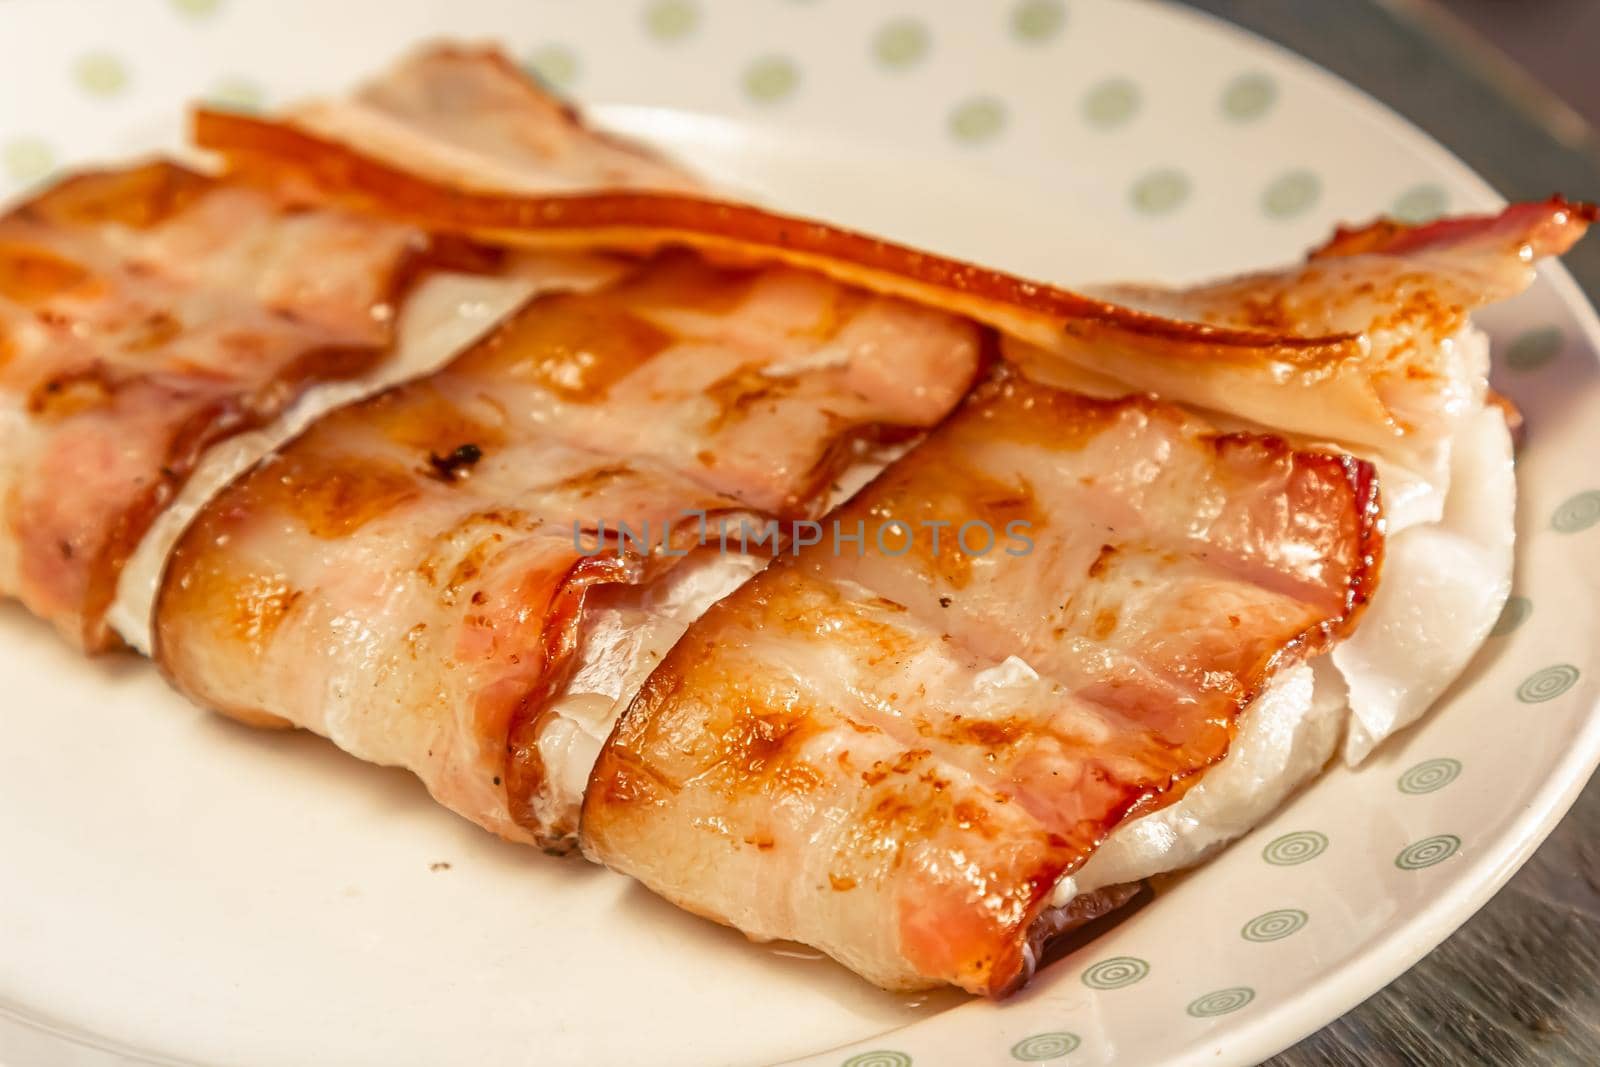 Cod fish wrapped in bacon by Milanchikov